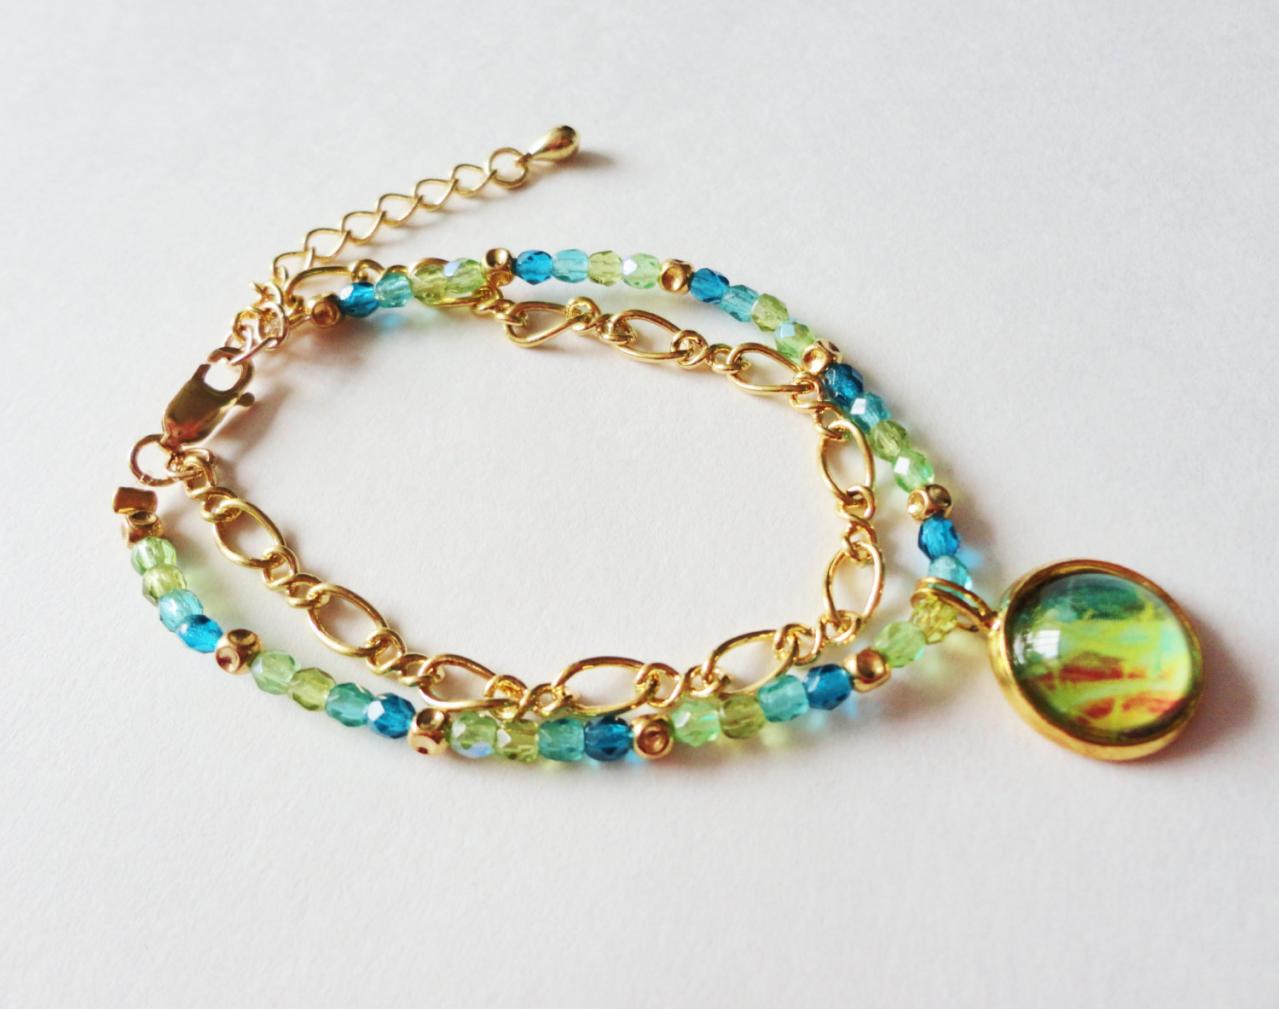 Nautical Galaxy Bracelet Beautiful Blue And Green Glass Beaded Bracelet And Gold Plated Bezel And Chain, Delicate Wearable Fine Art Jewelry